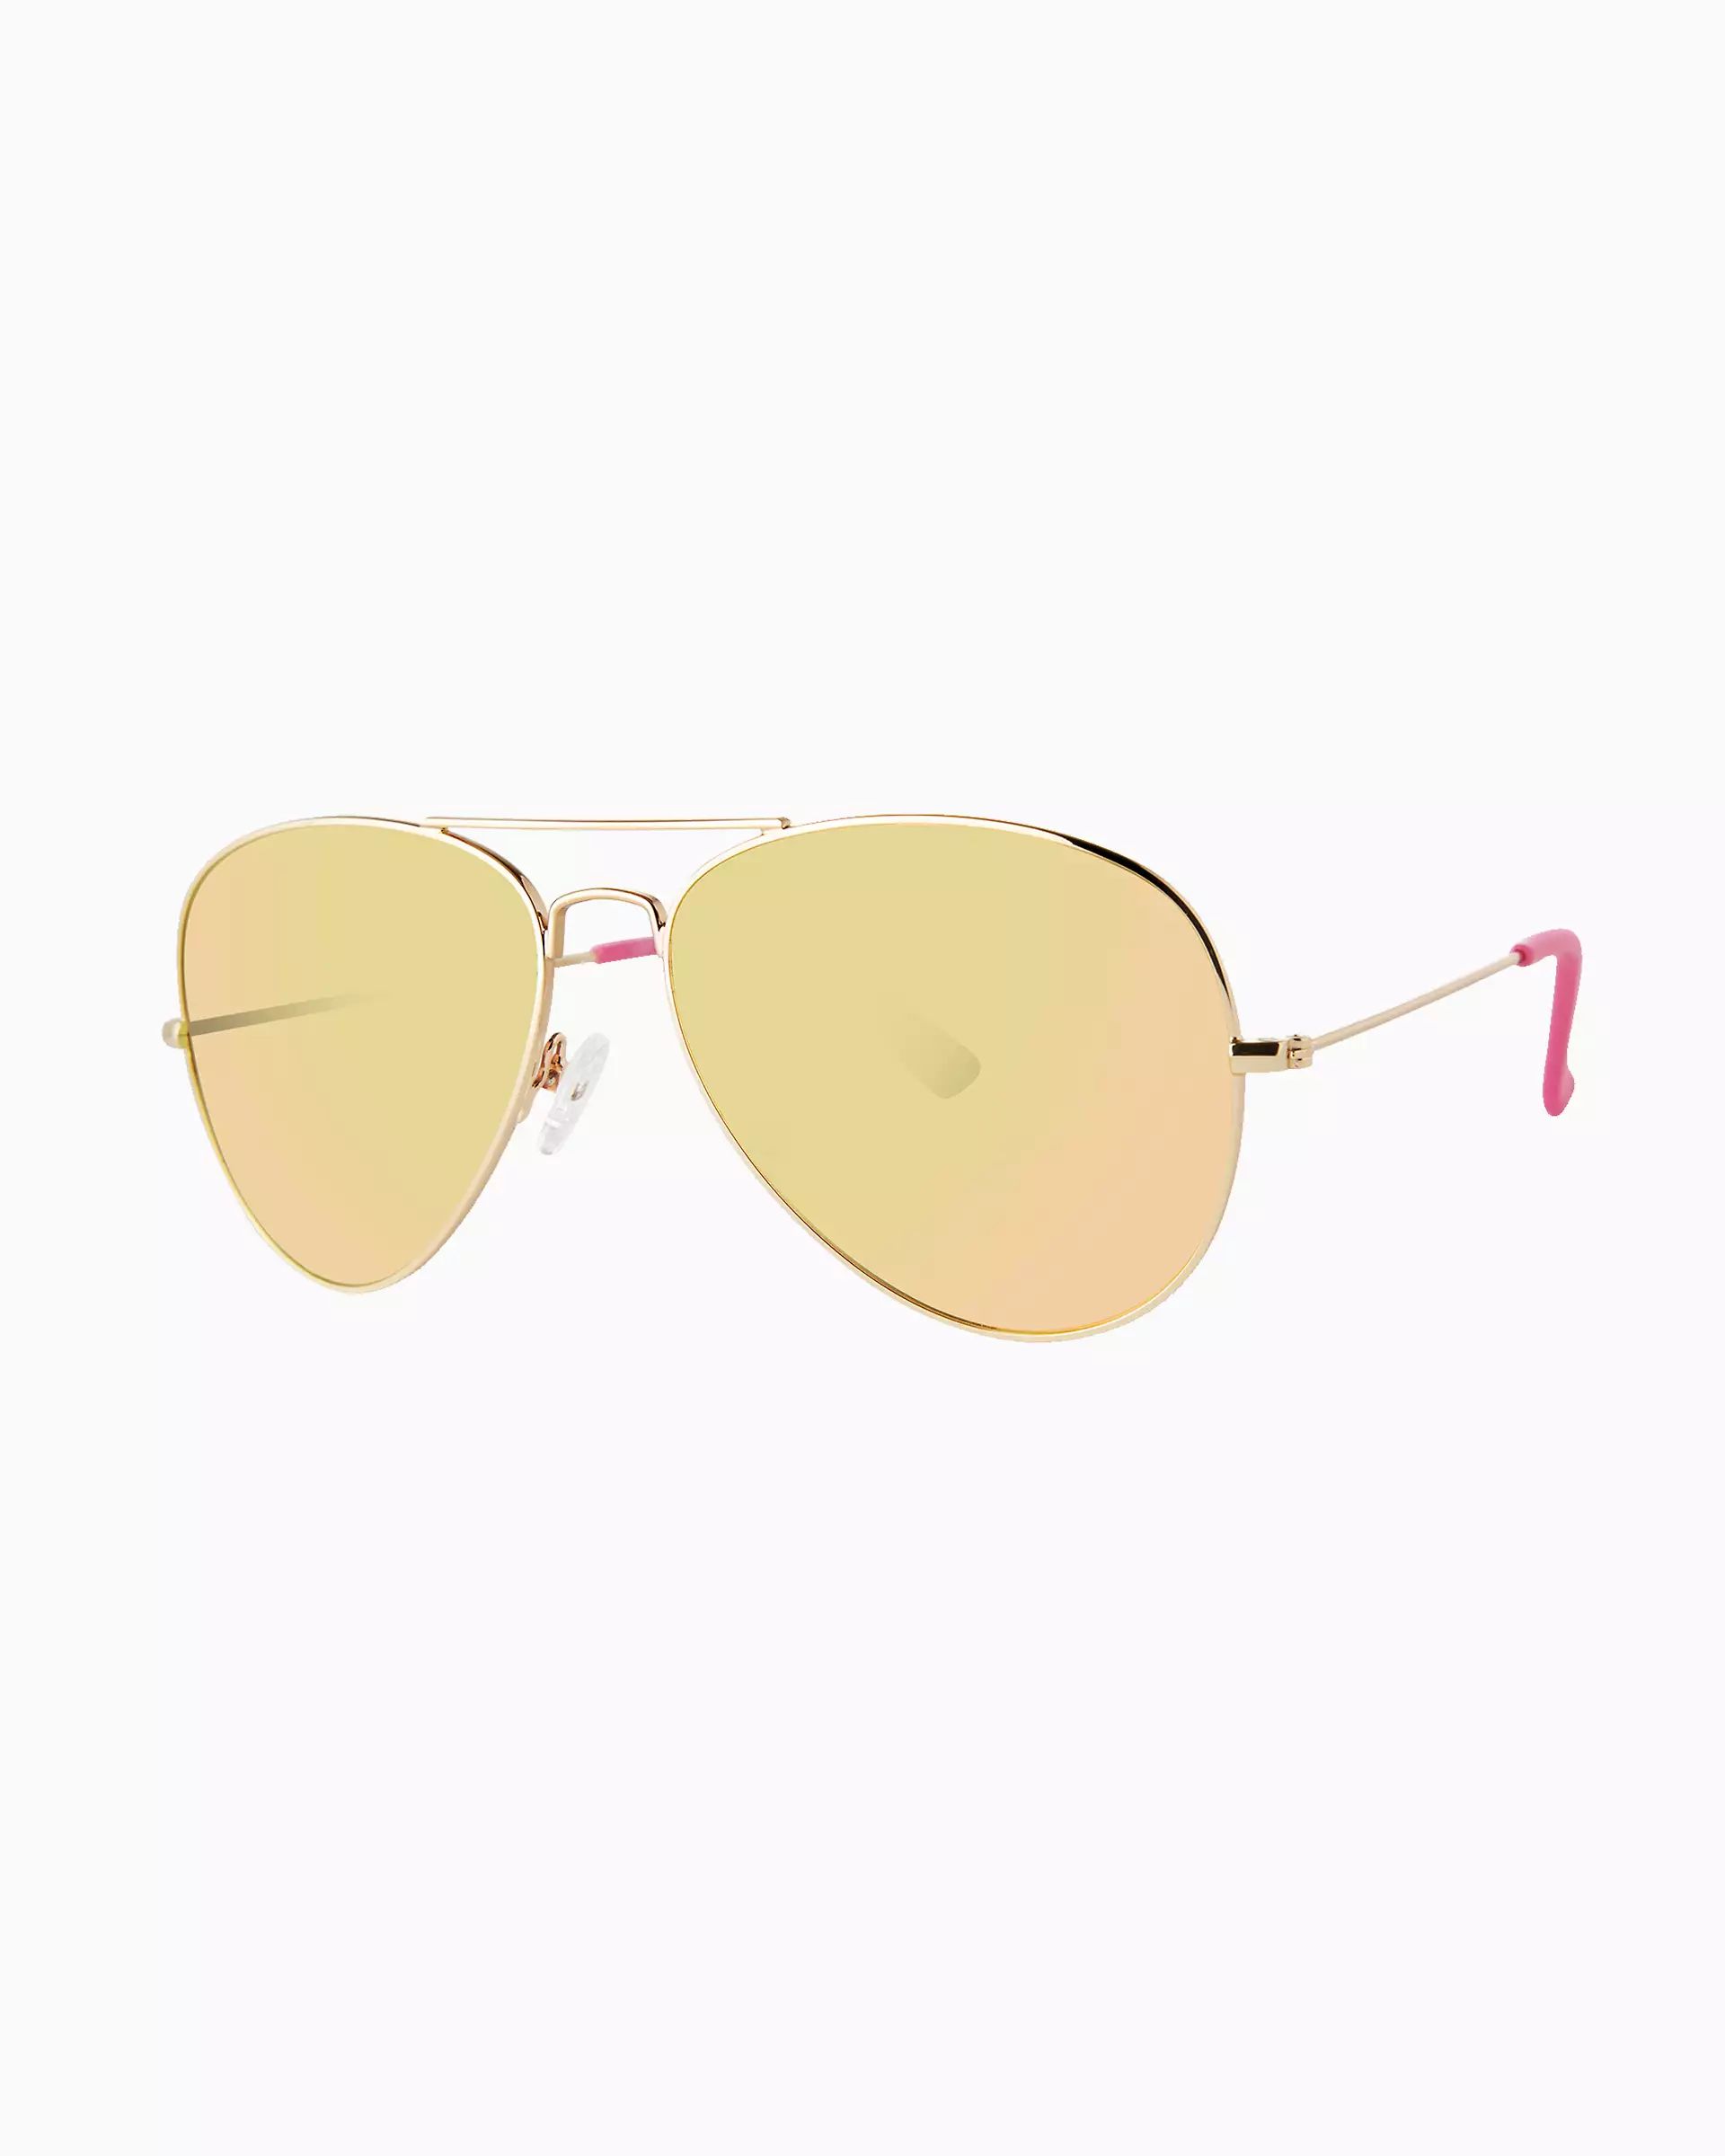 Lexy Sunglasses | Lilly Pulitzer